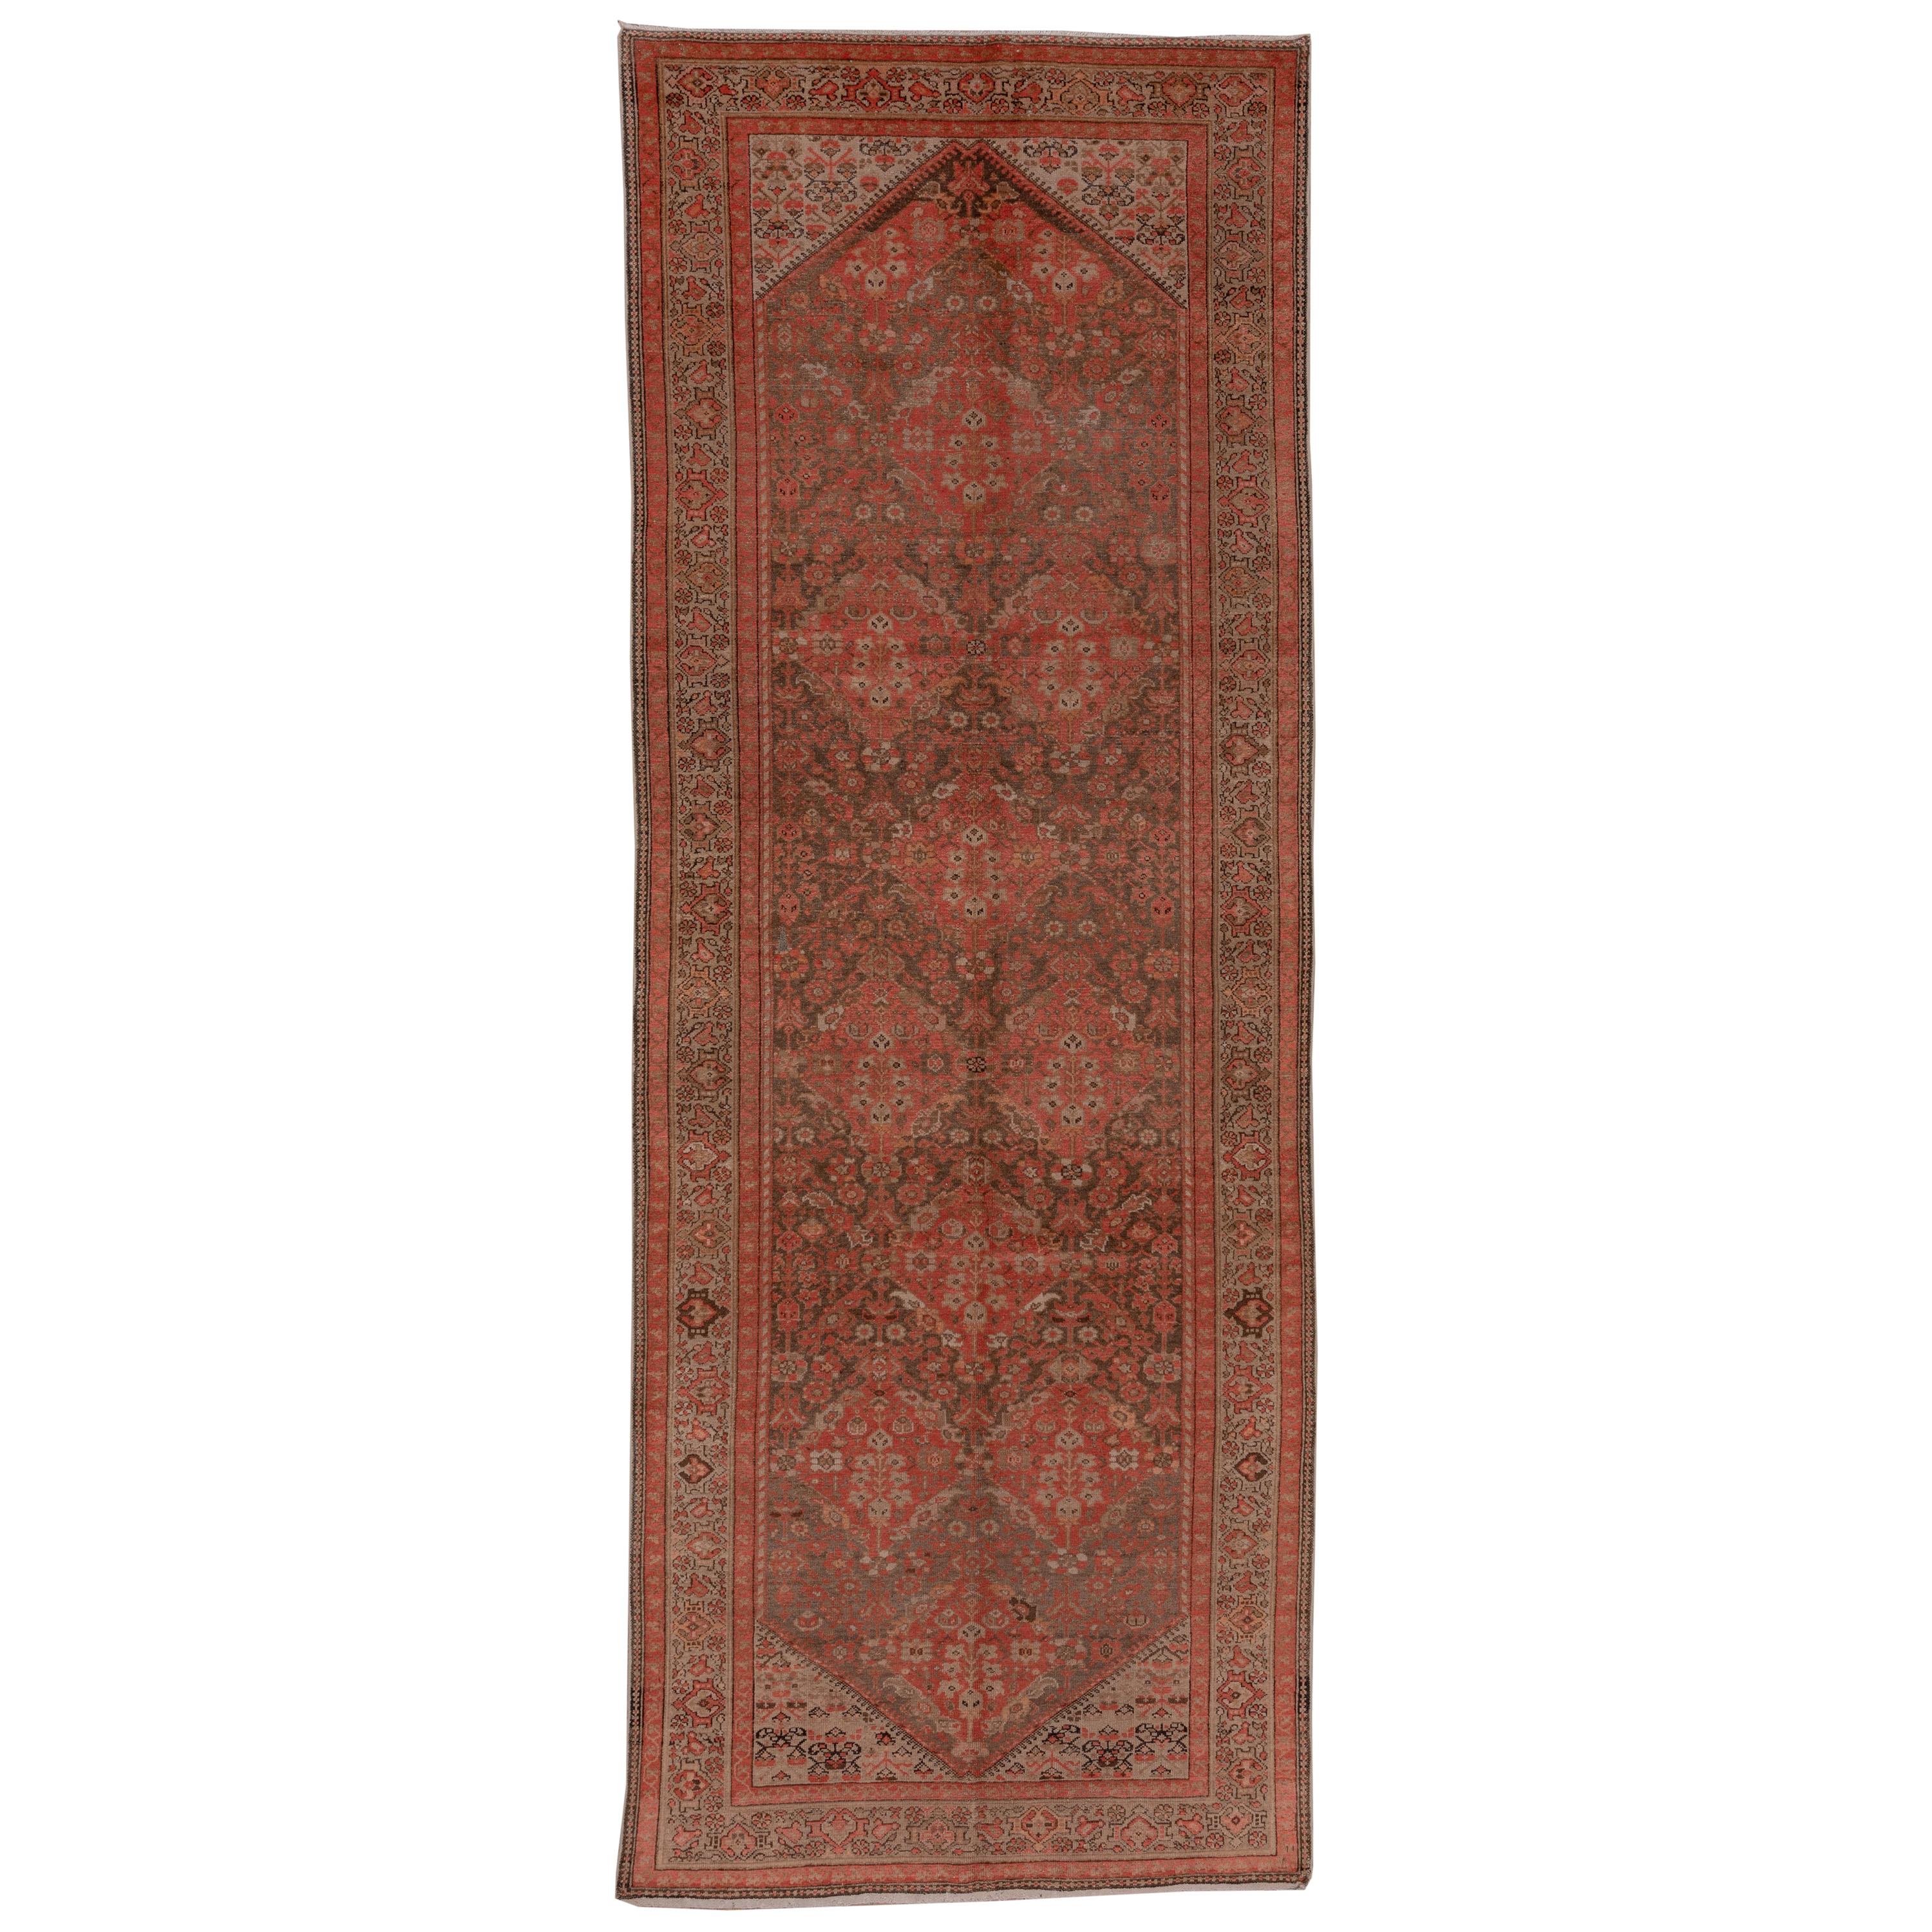 Antique Persian Malayer Gallery Rug, Red and Brown Field, Coral Tones For Sale